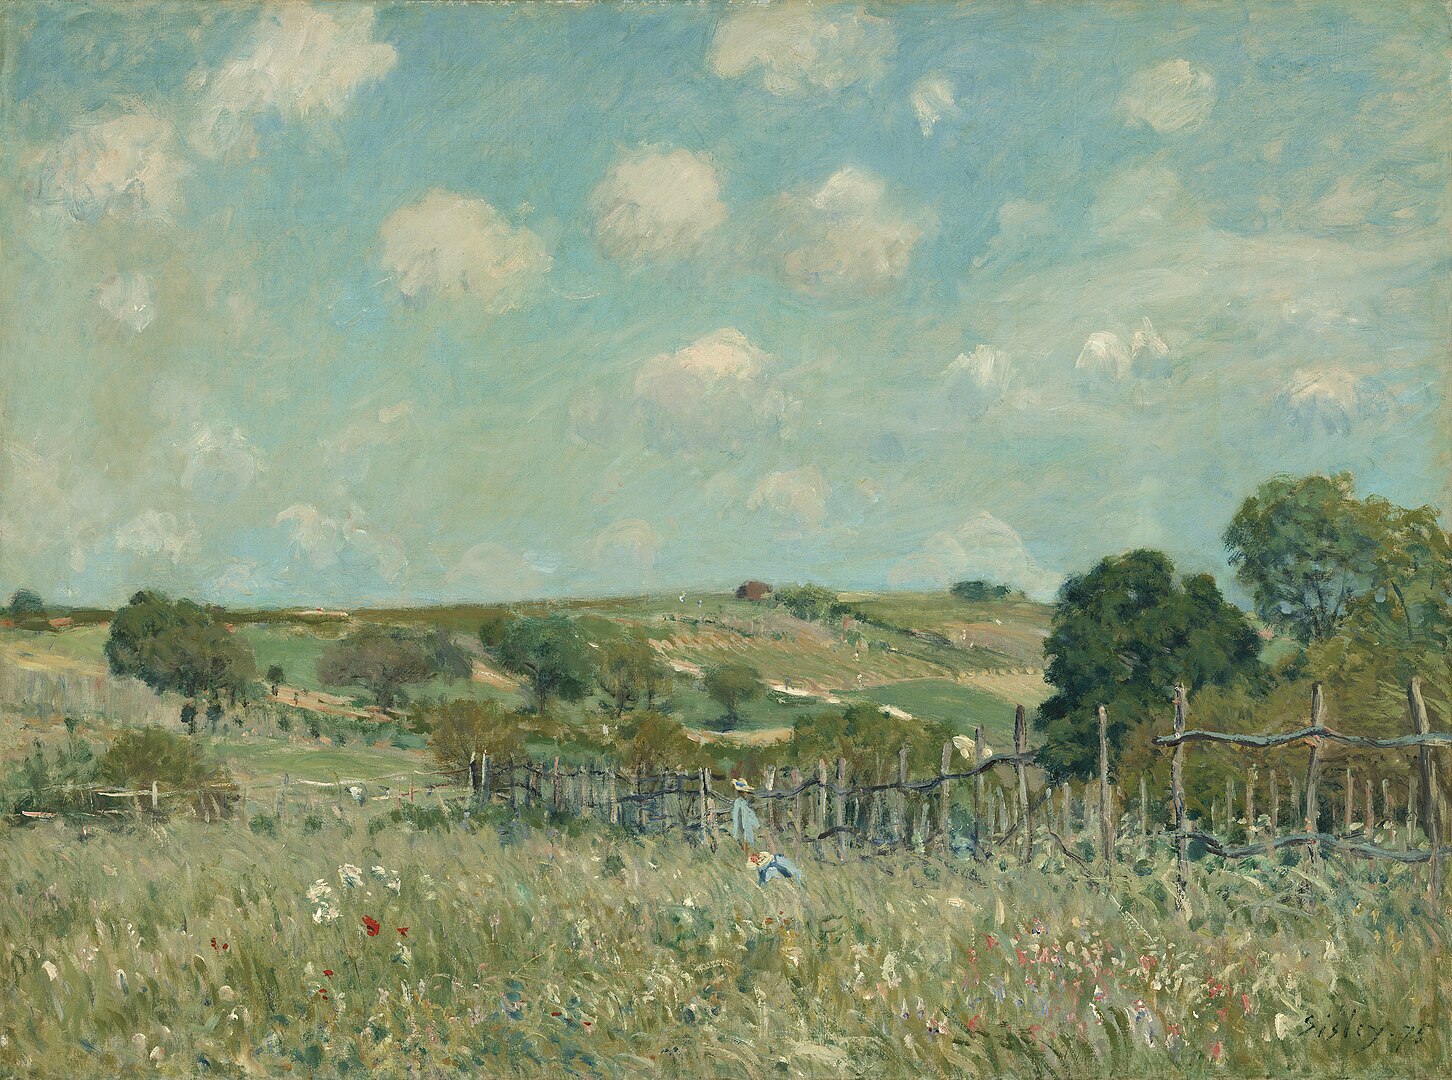 A landscape view of a meadow